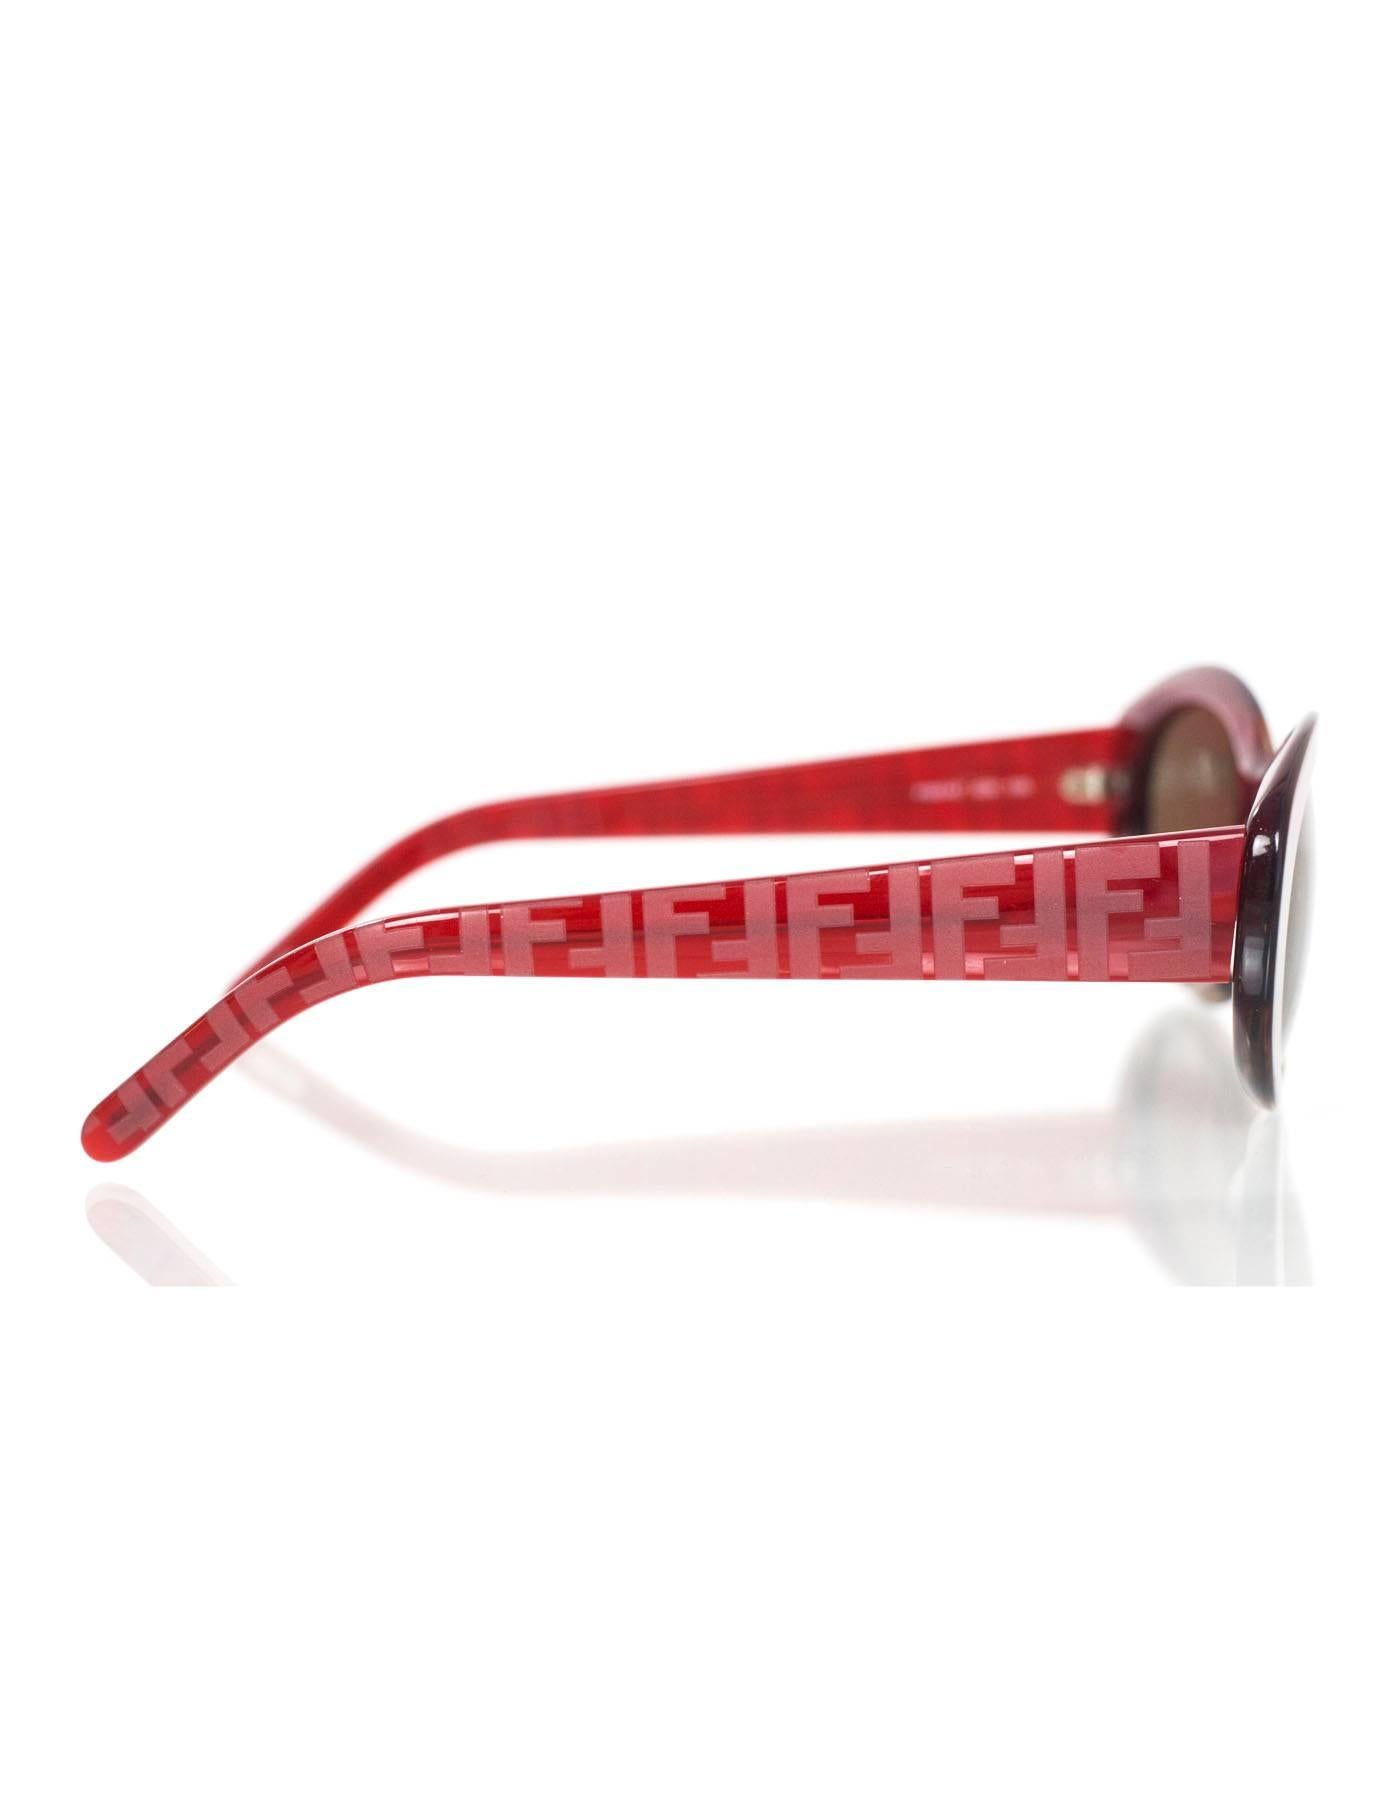 Fendi Burgundy Resin & Zucca Print Cateye Sunglasses

Made In: Italy
Color: Burgundy
Materials: Resin
Arm Stamp: FS5147 620 135
Overall Condition: Excellent pre-owned condition with the exception of one small scratch to edge of left